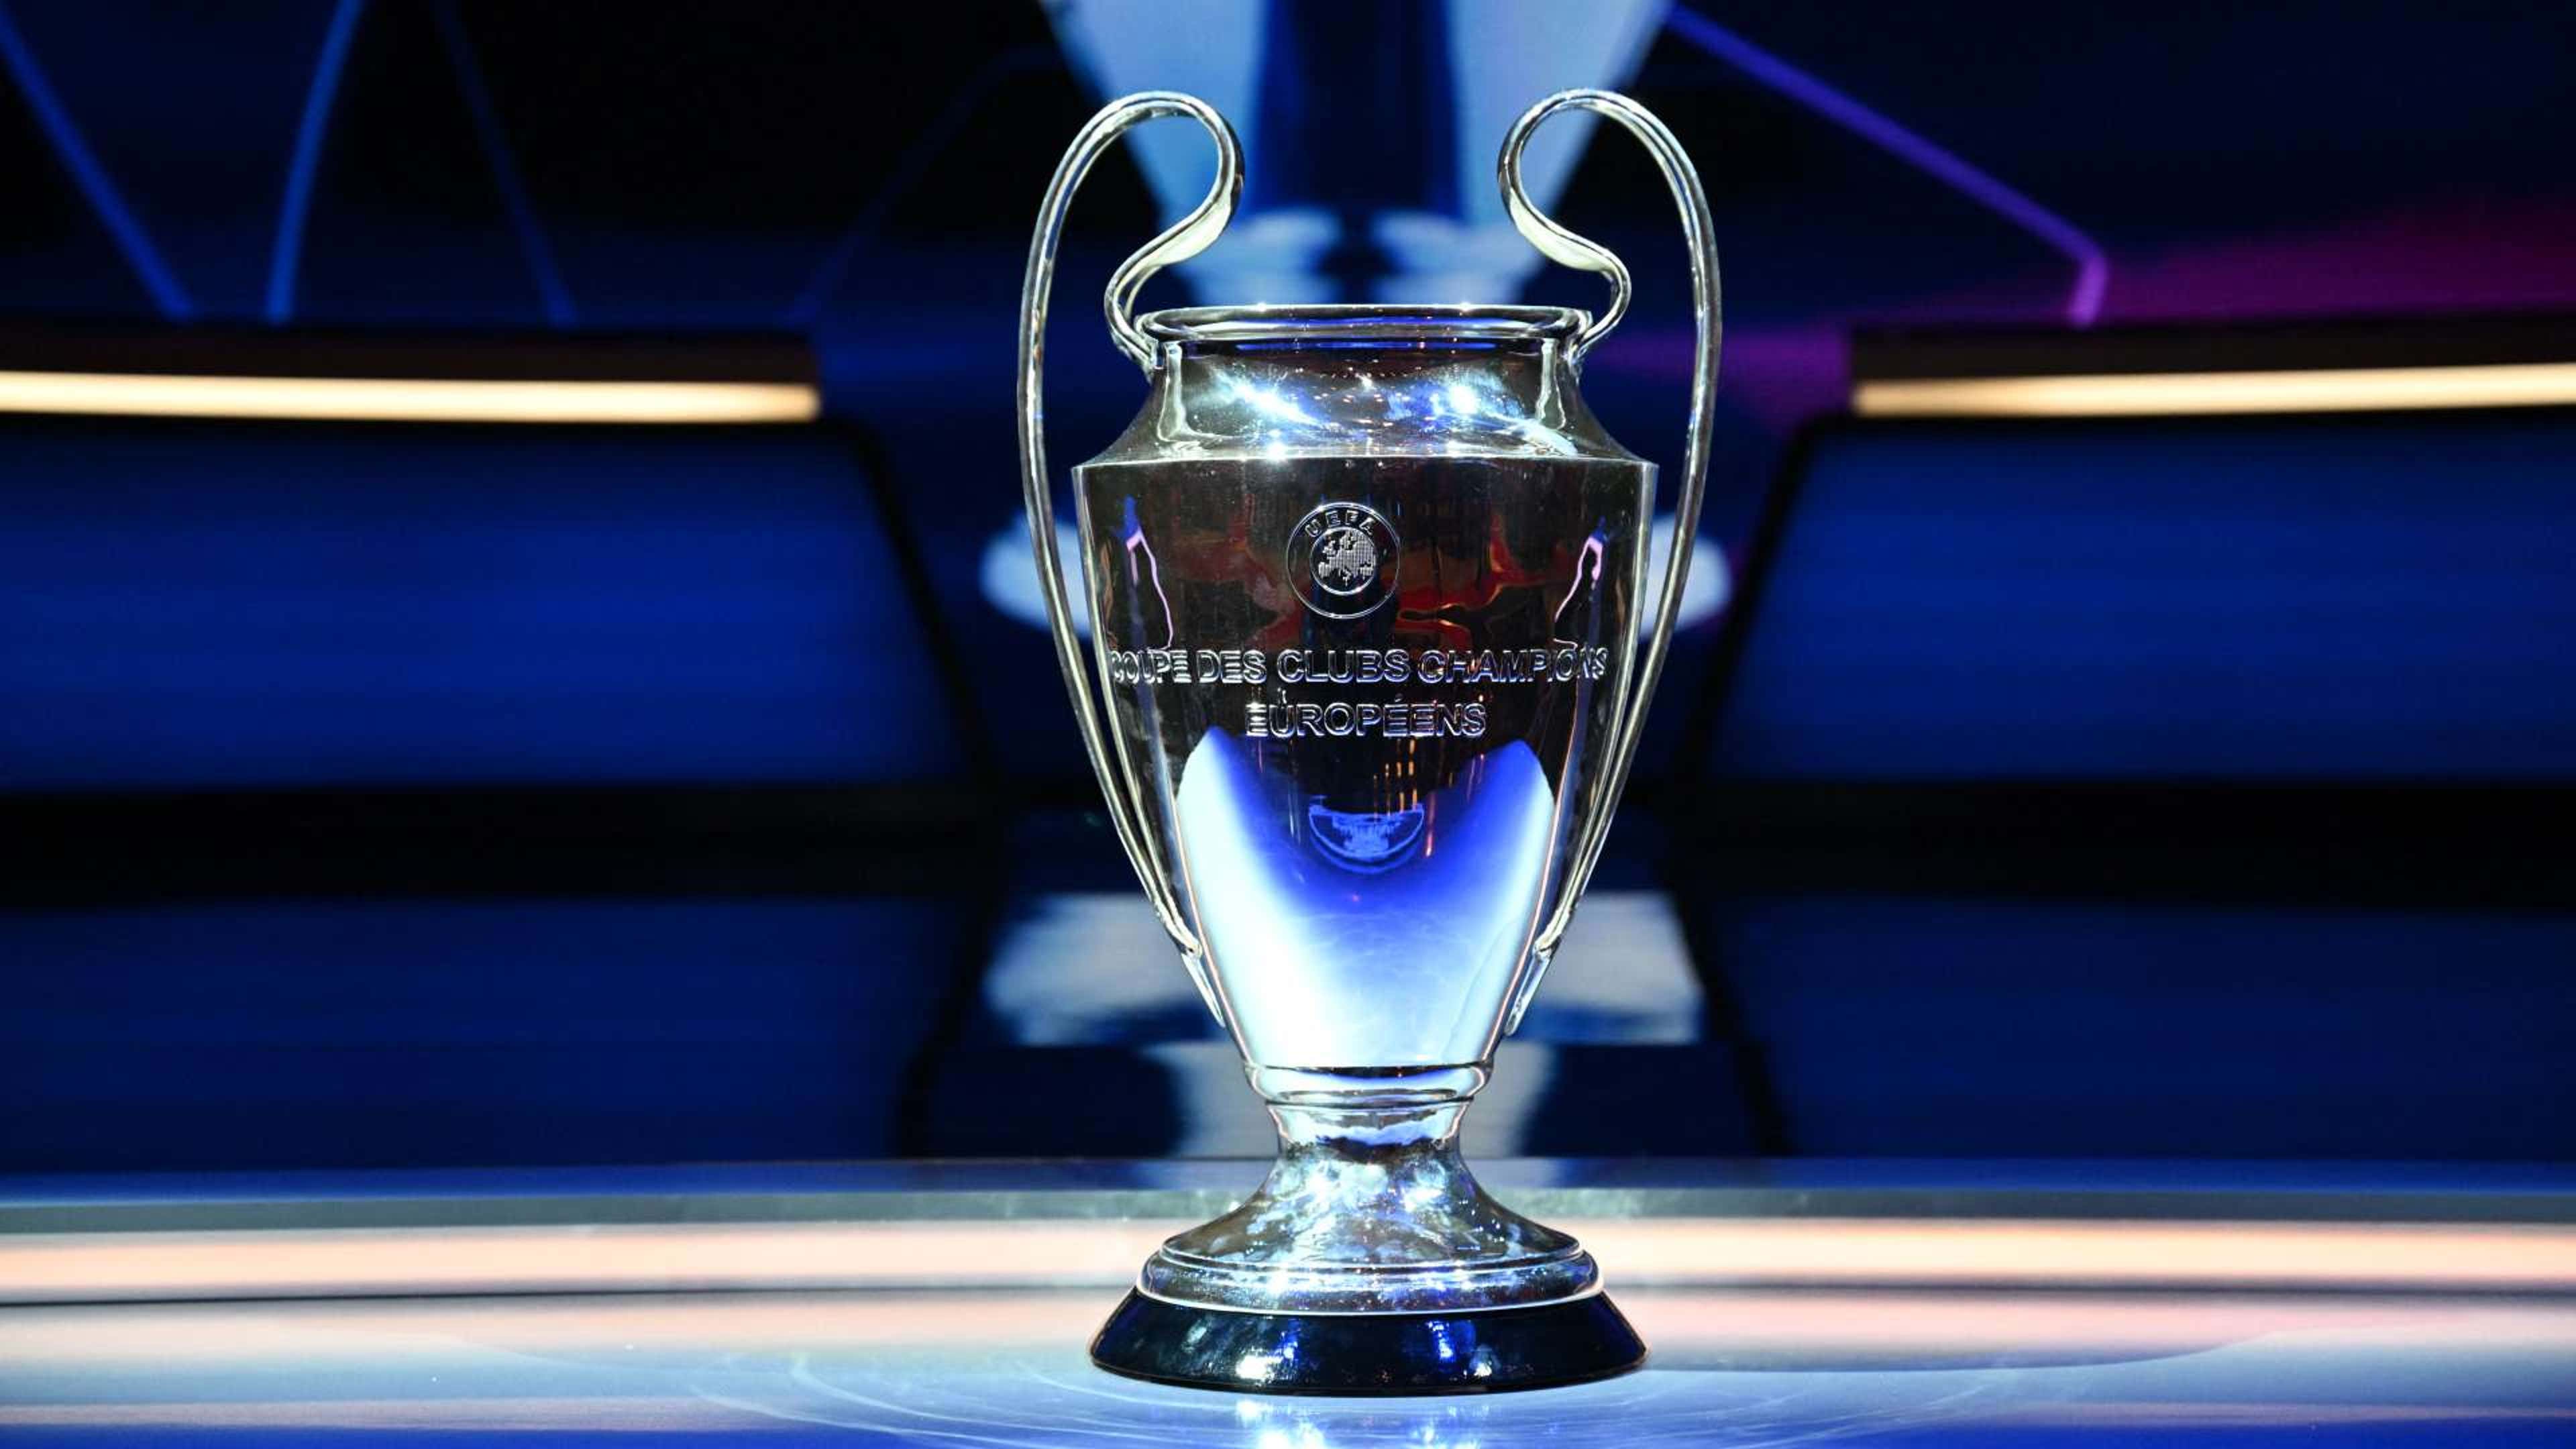 The Champions League returns: matches, schedules and when the